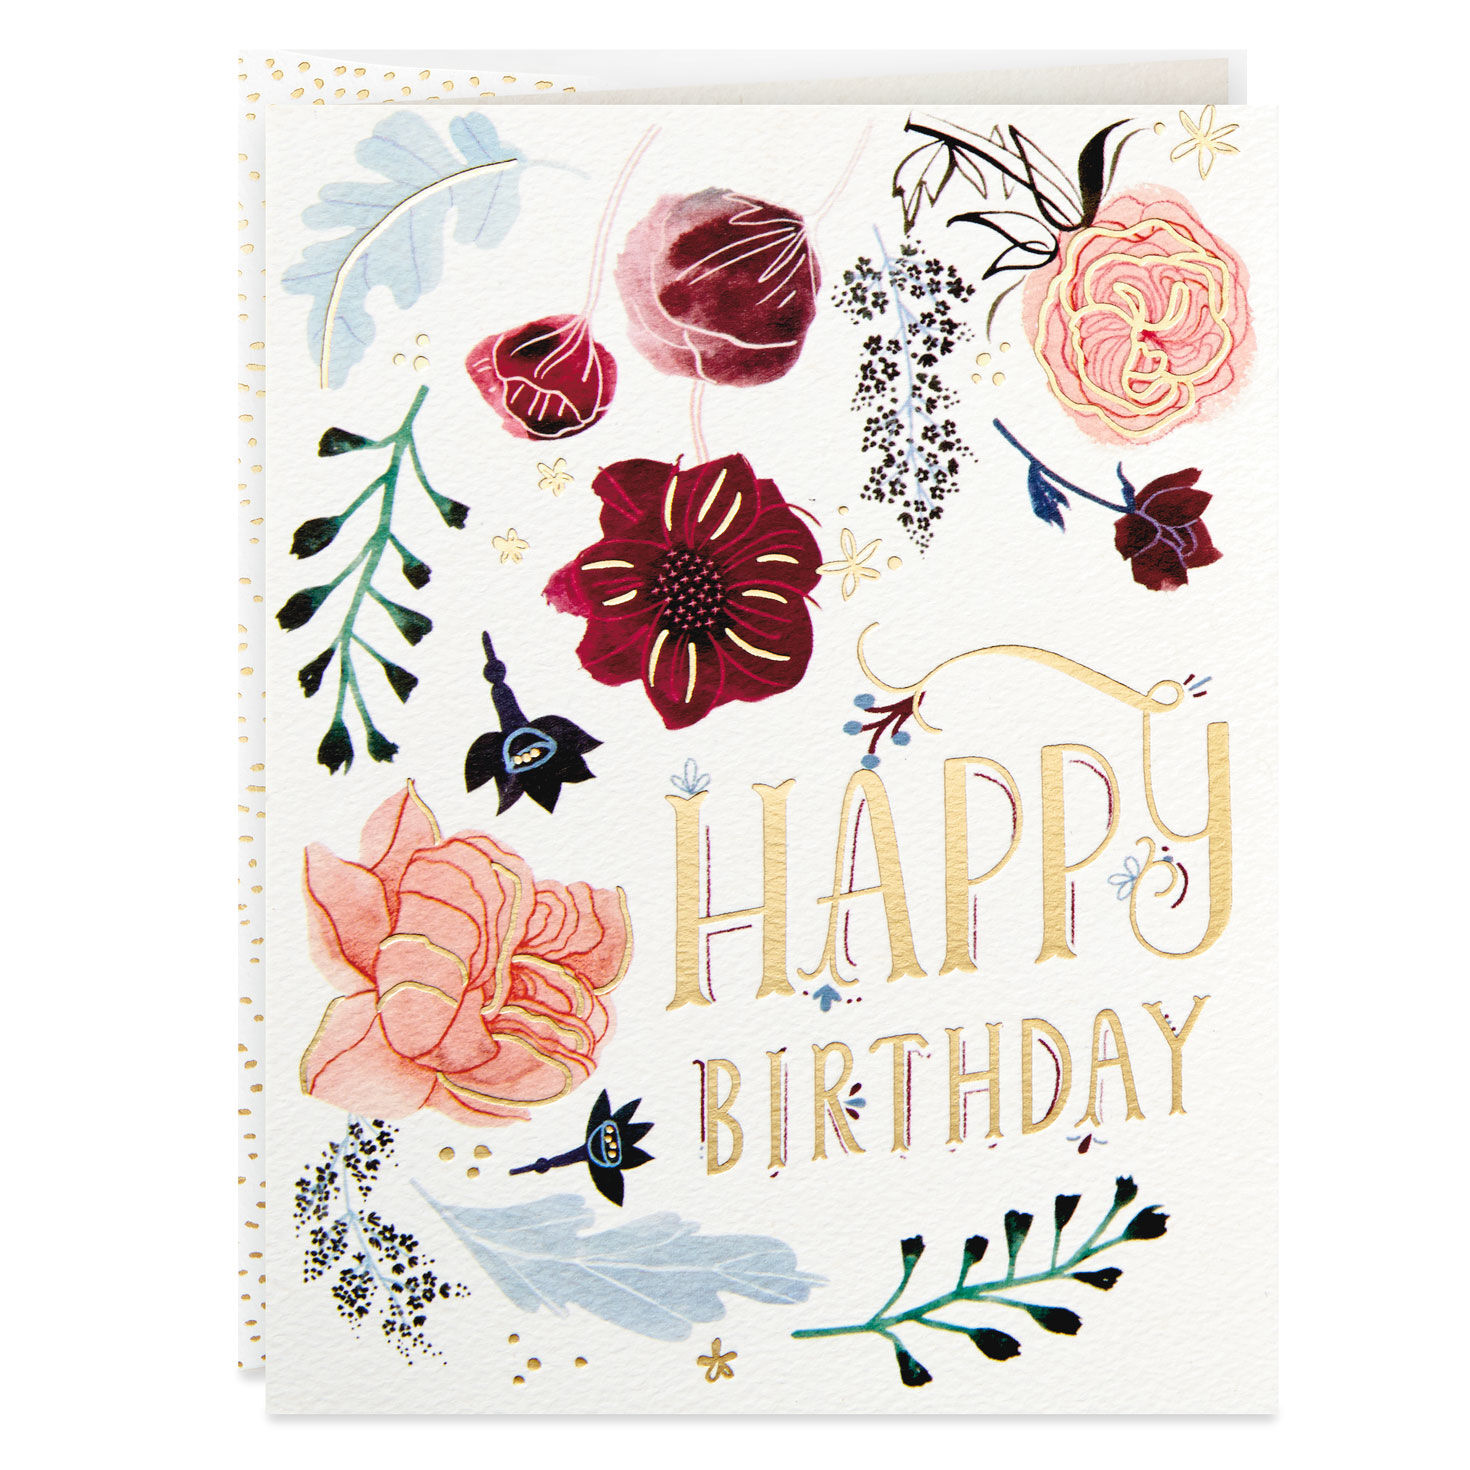 SHOPPING THEMED BIRTHDAY CARD From TEN BAMBOO STUDIO PREMIUM GREETING CARDS 